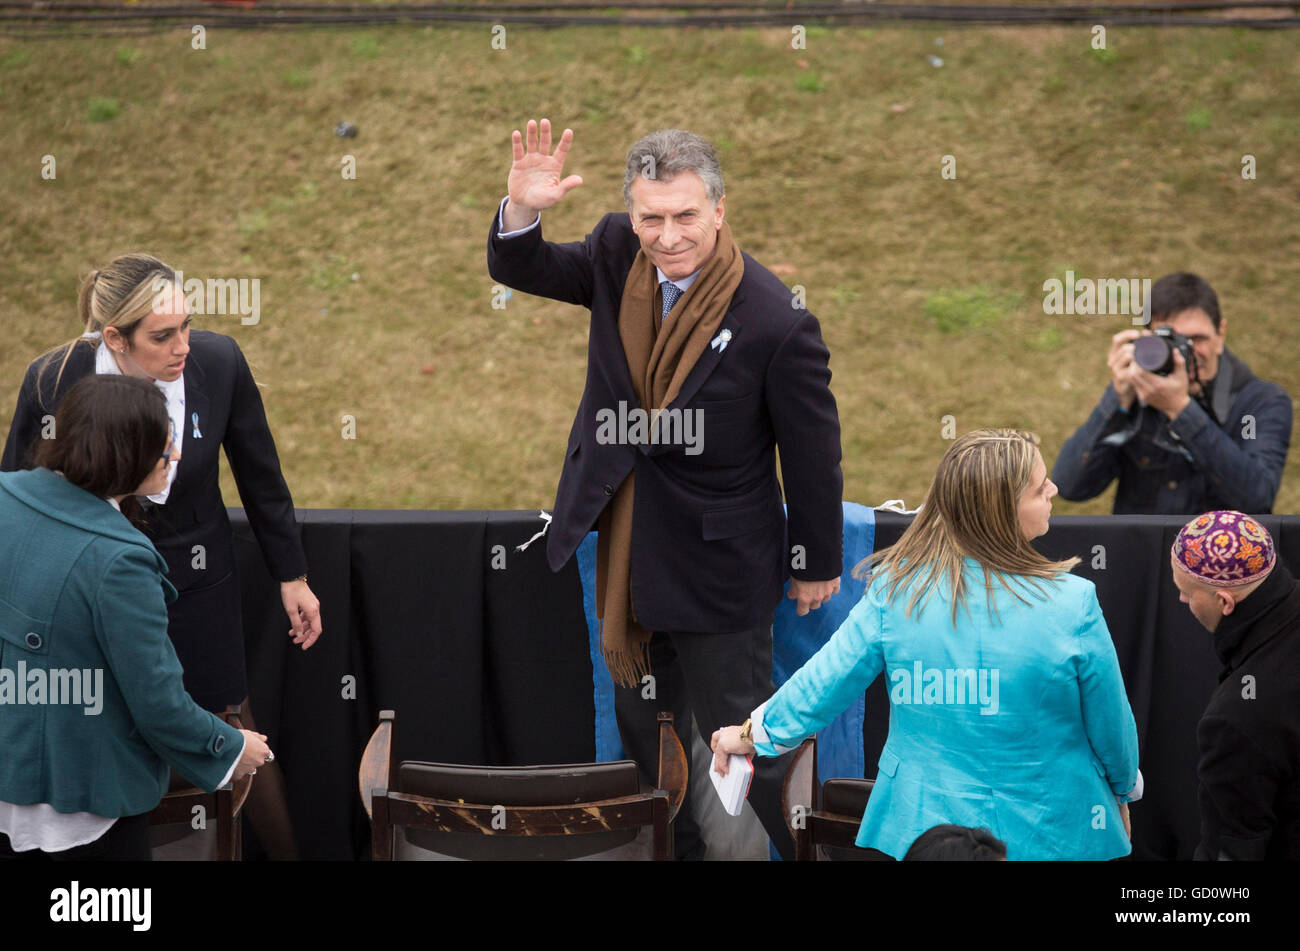 Buenos Aires. 10th July, 2016. Argentine President Mauricio Macri (C) attends a parade marking the bicentennial anniversary of Argentina's independence from Spain, in Buenos Aires July 10, 2016. © Martin Zabala/Xinhua/Alamy Live News Stock Photo